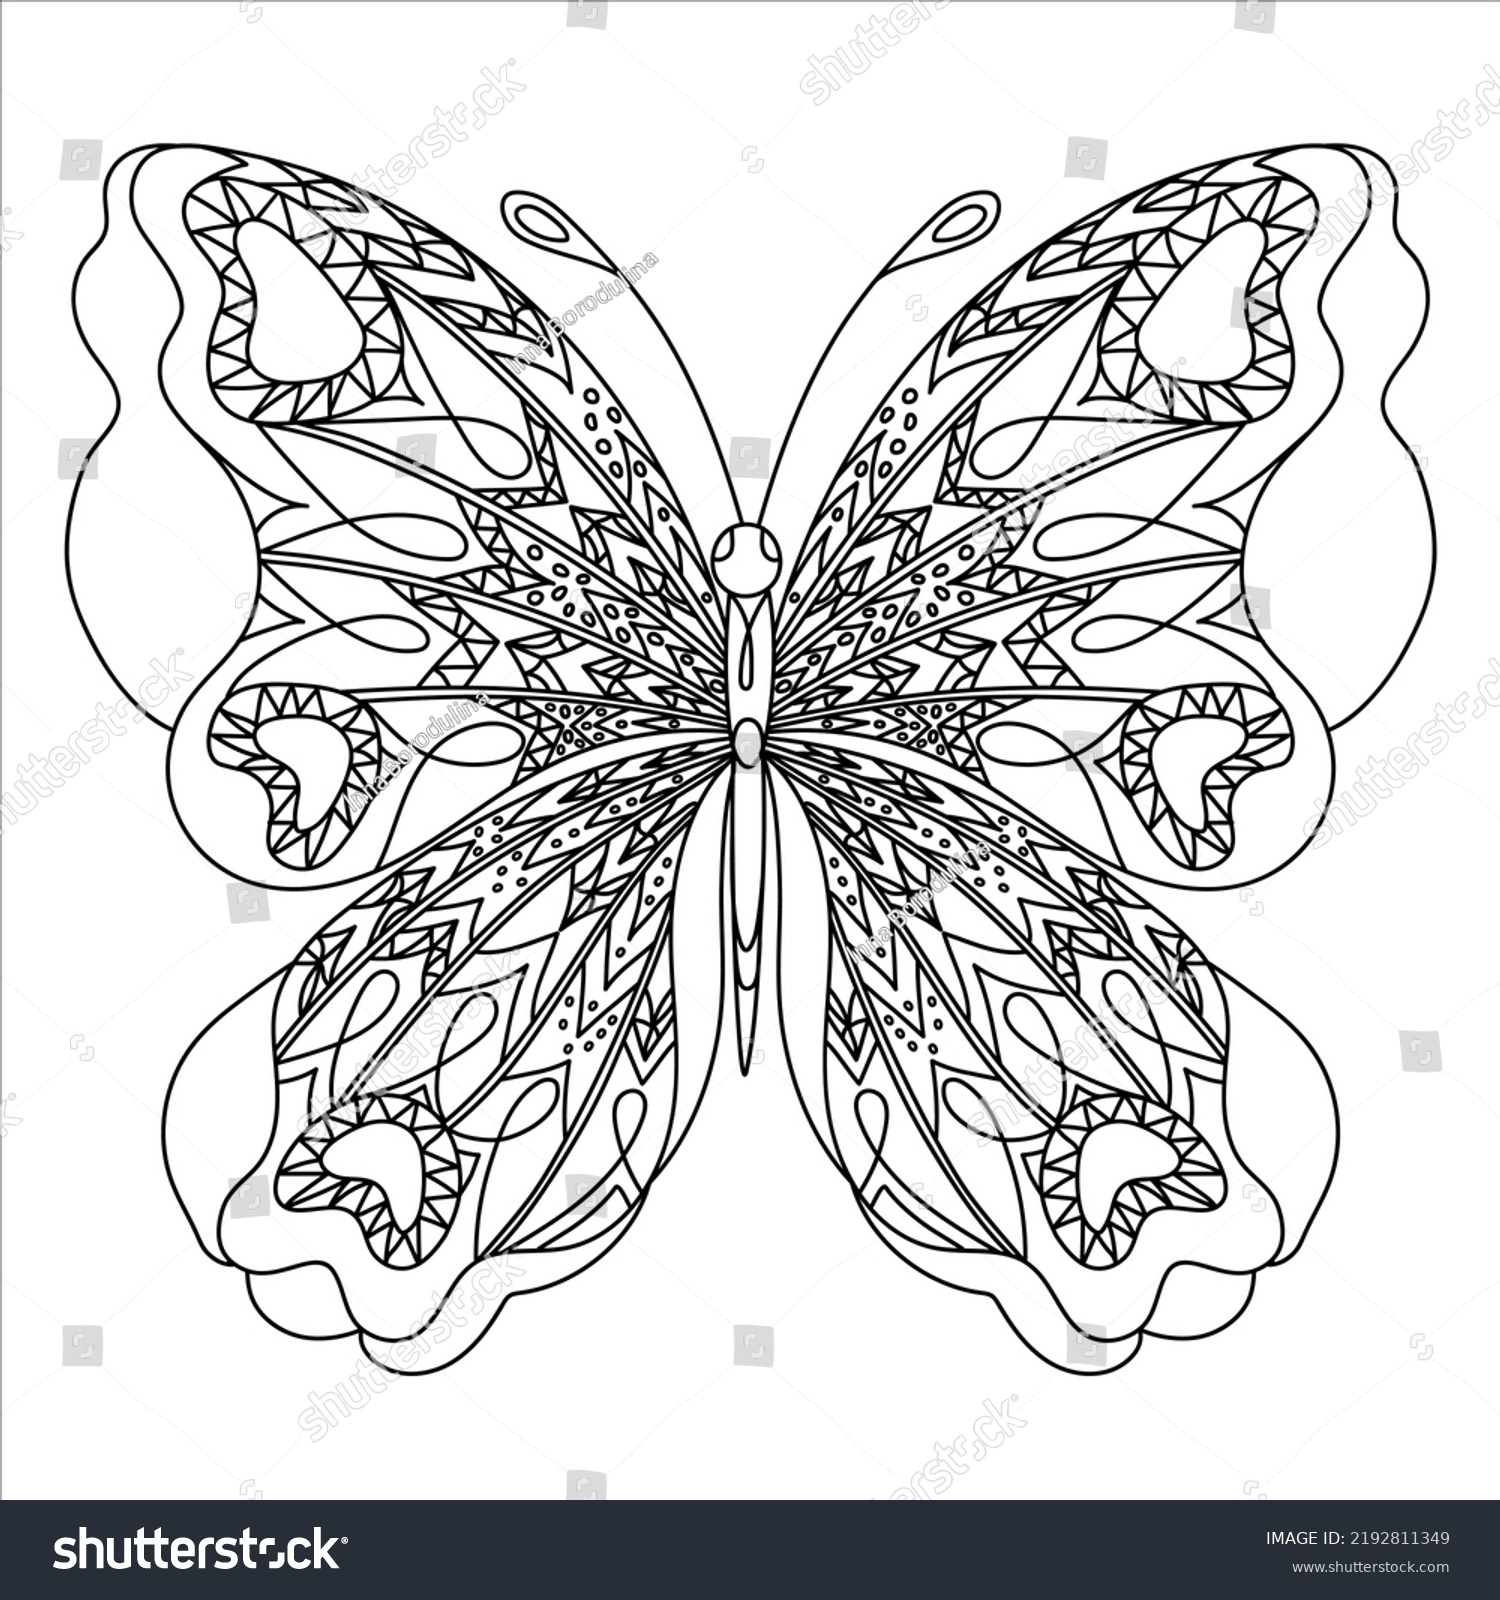 Butterfly Coloring Page Zentangle Style Stock Vector (Royalty Free ...